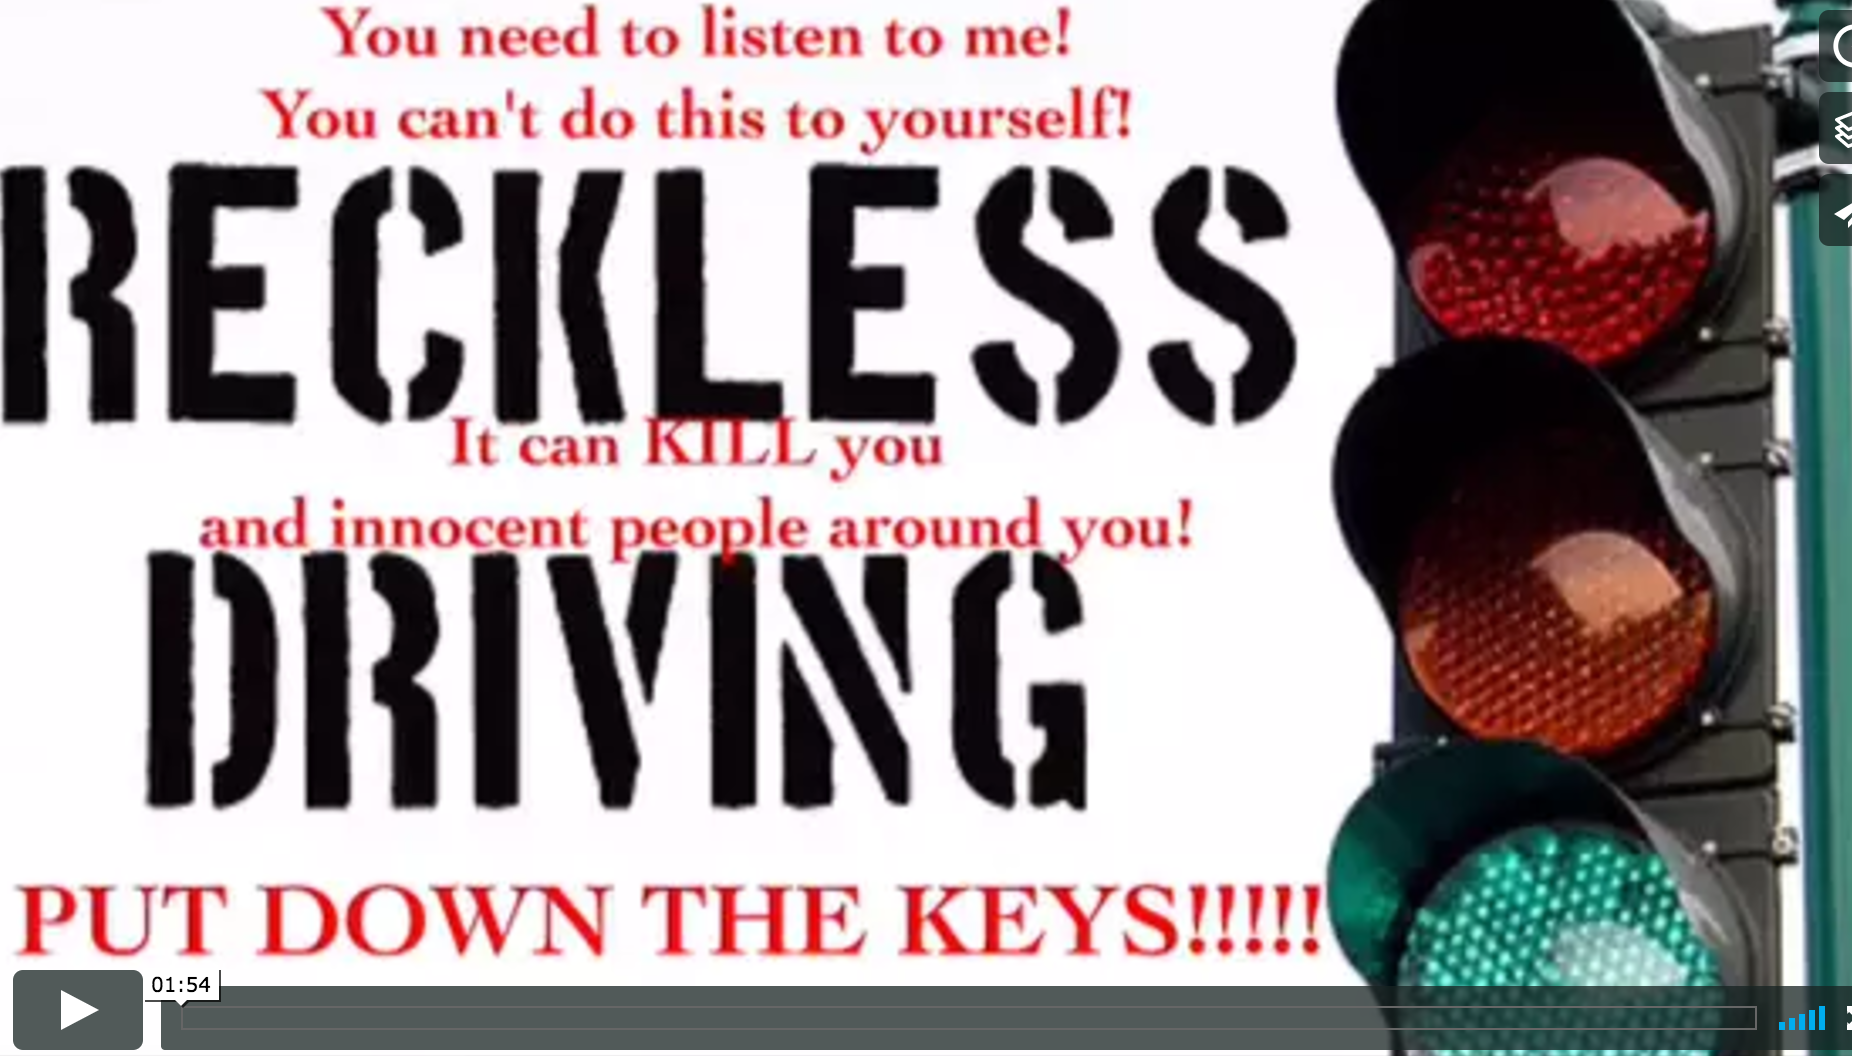 Reckless Driving. It can kill you and innocent people around you!